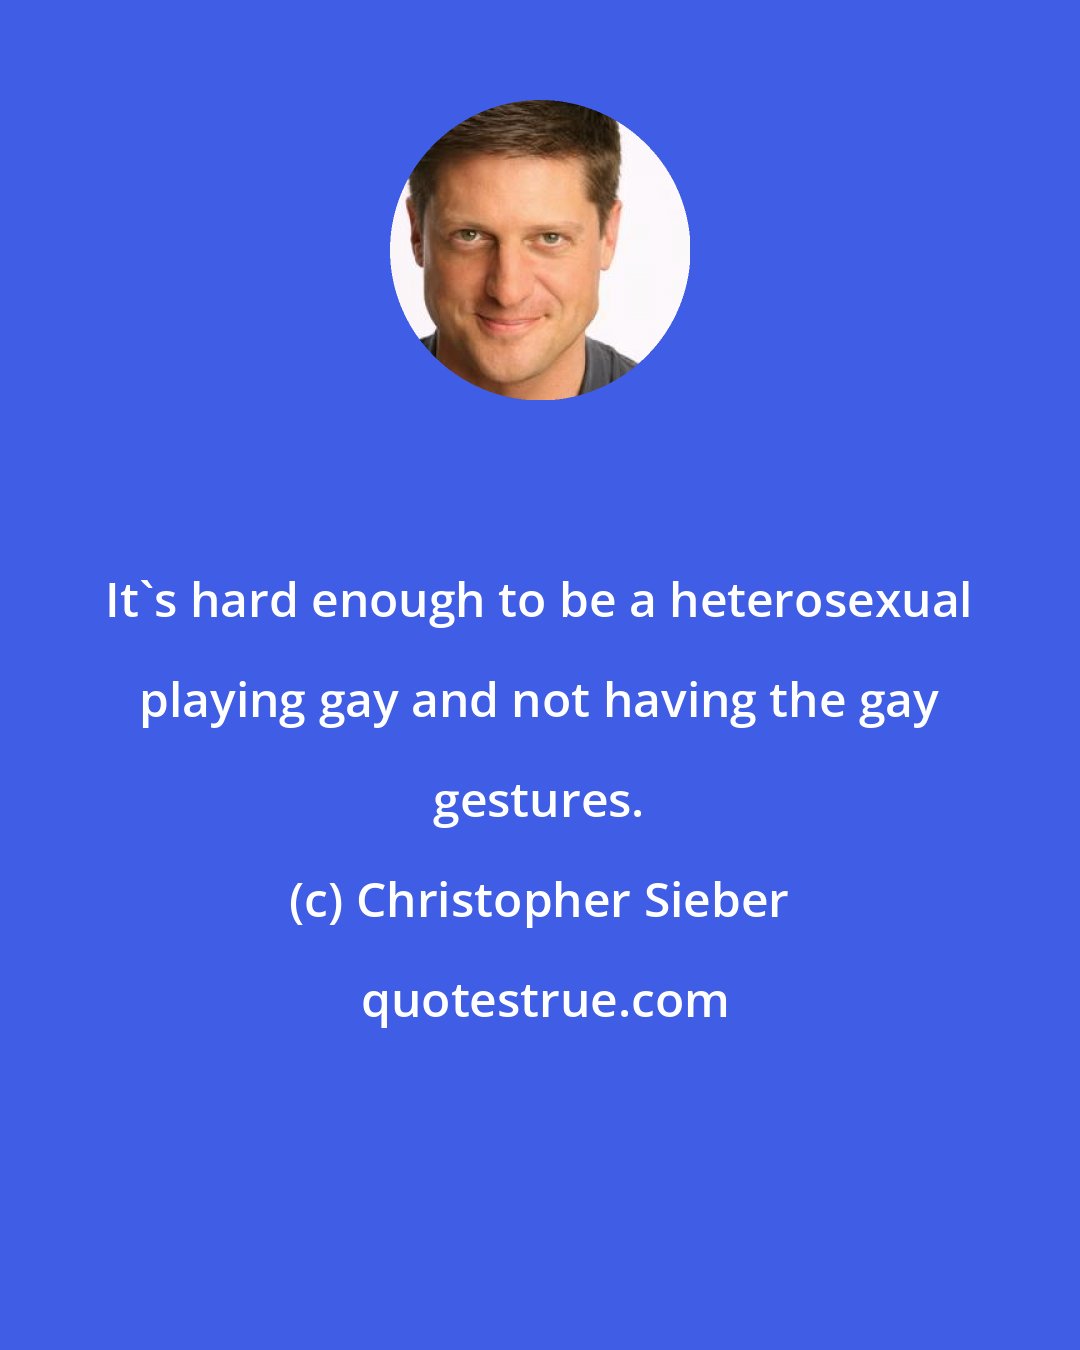 Christopher Sieber: It's hard enough to be a heterosexual playing gay and not having the gay gestures.